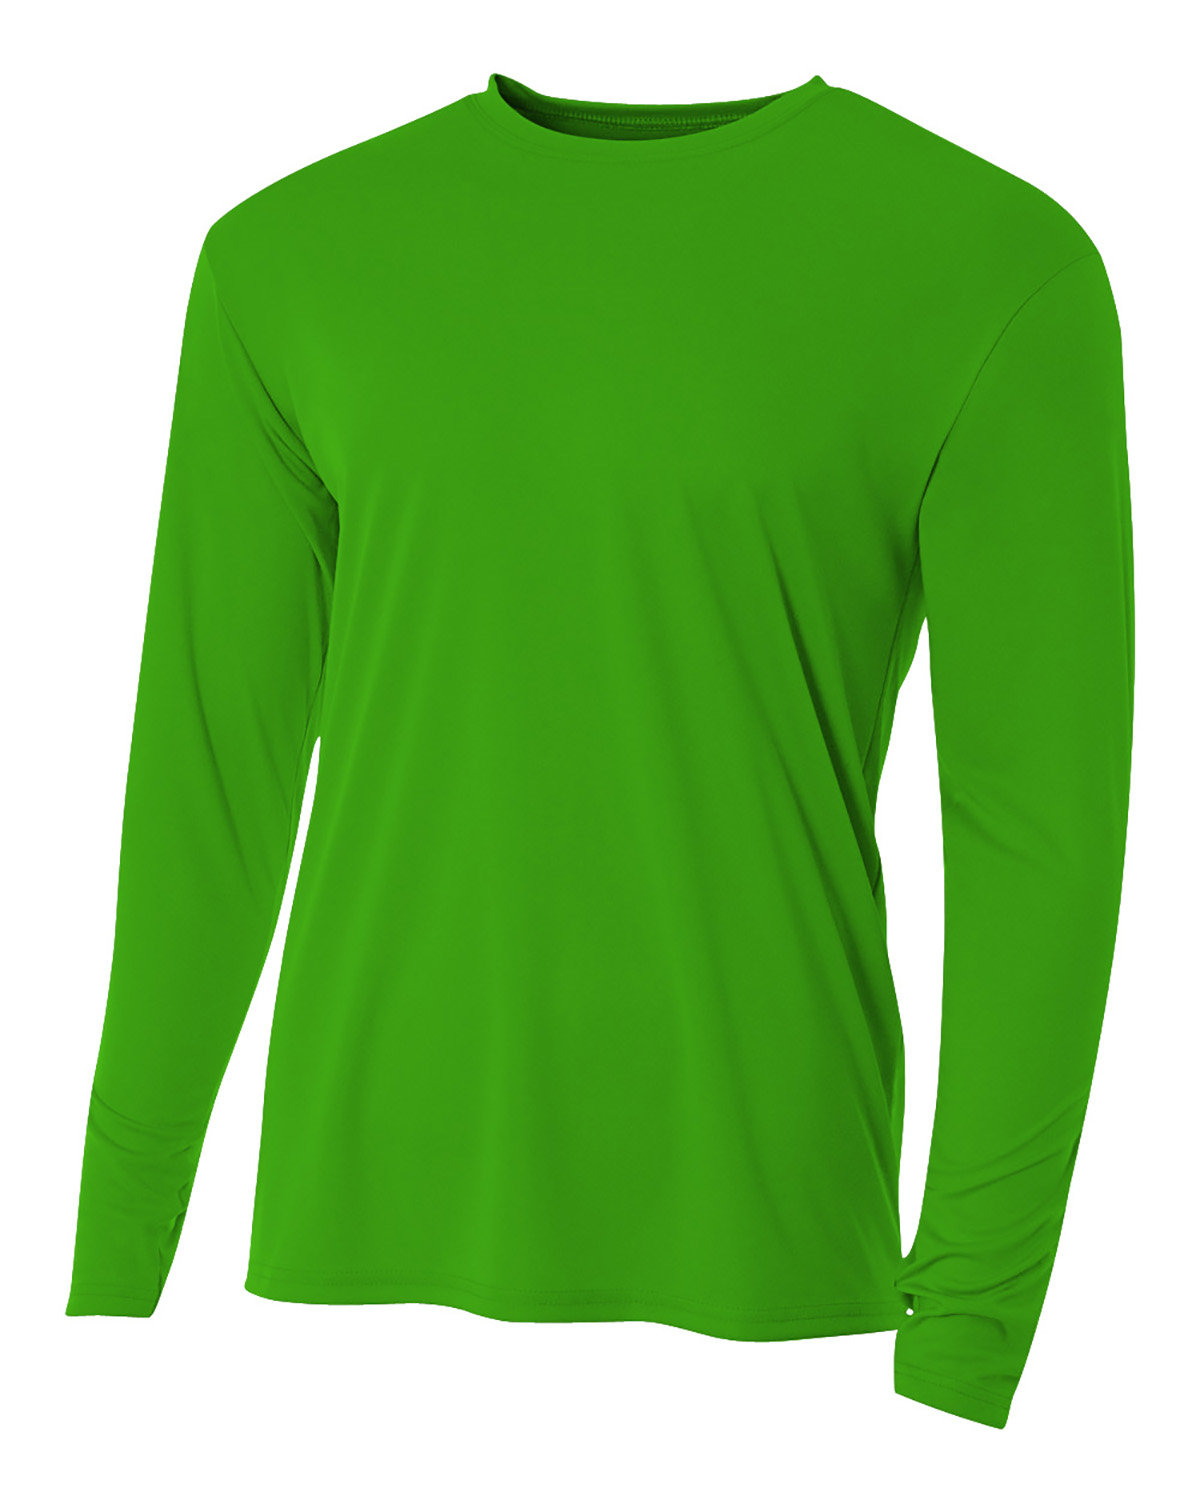 A4 N3165 Men's Cooling Performance Long Sleeve T-Shirt - Kelly - S